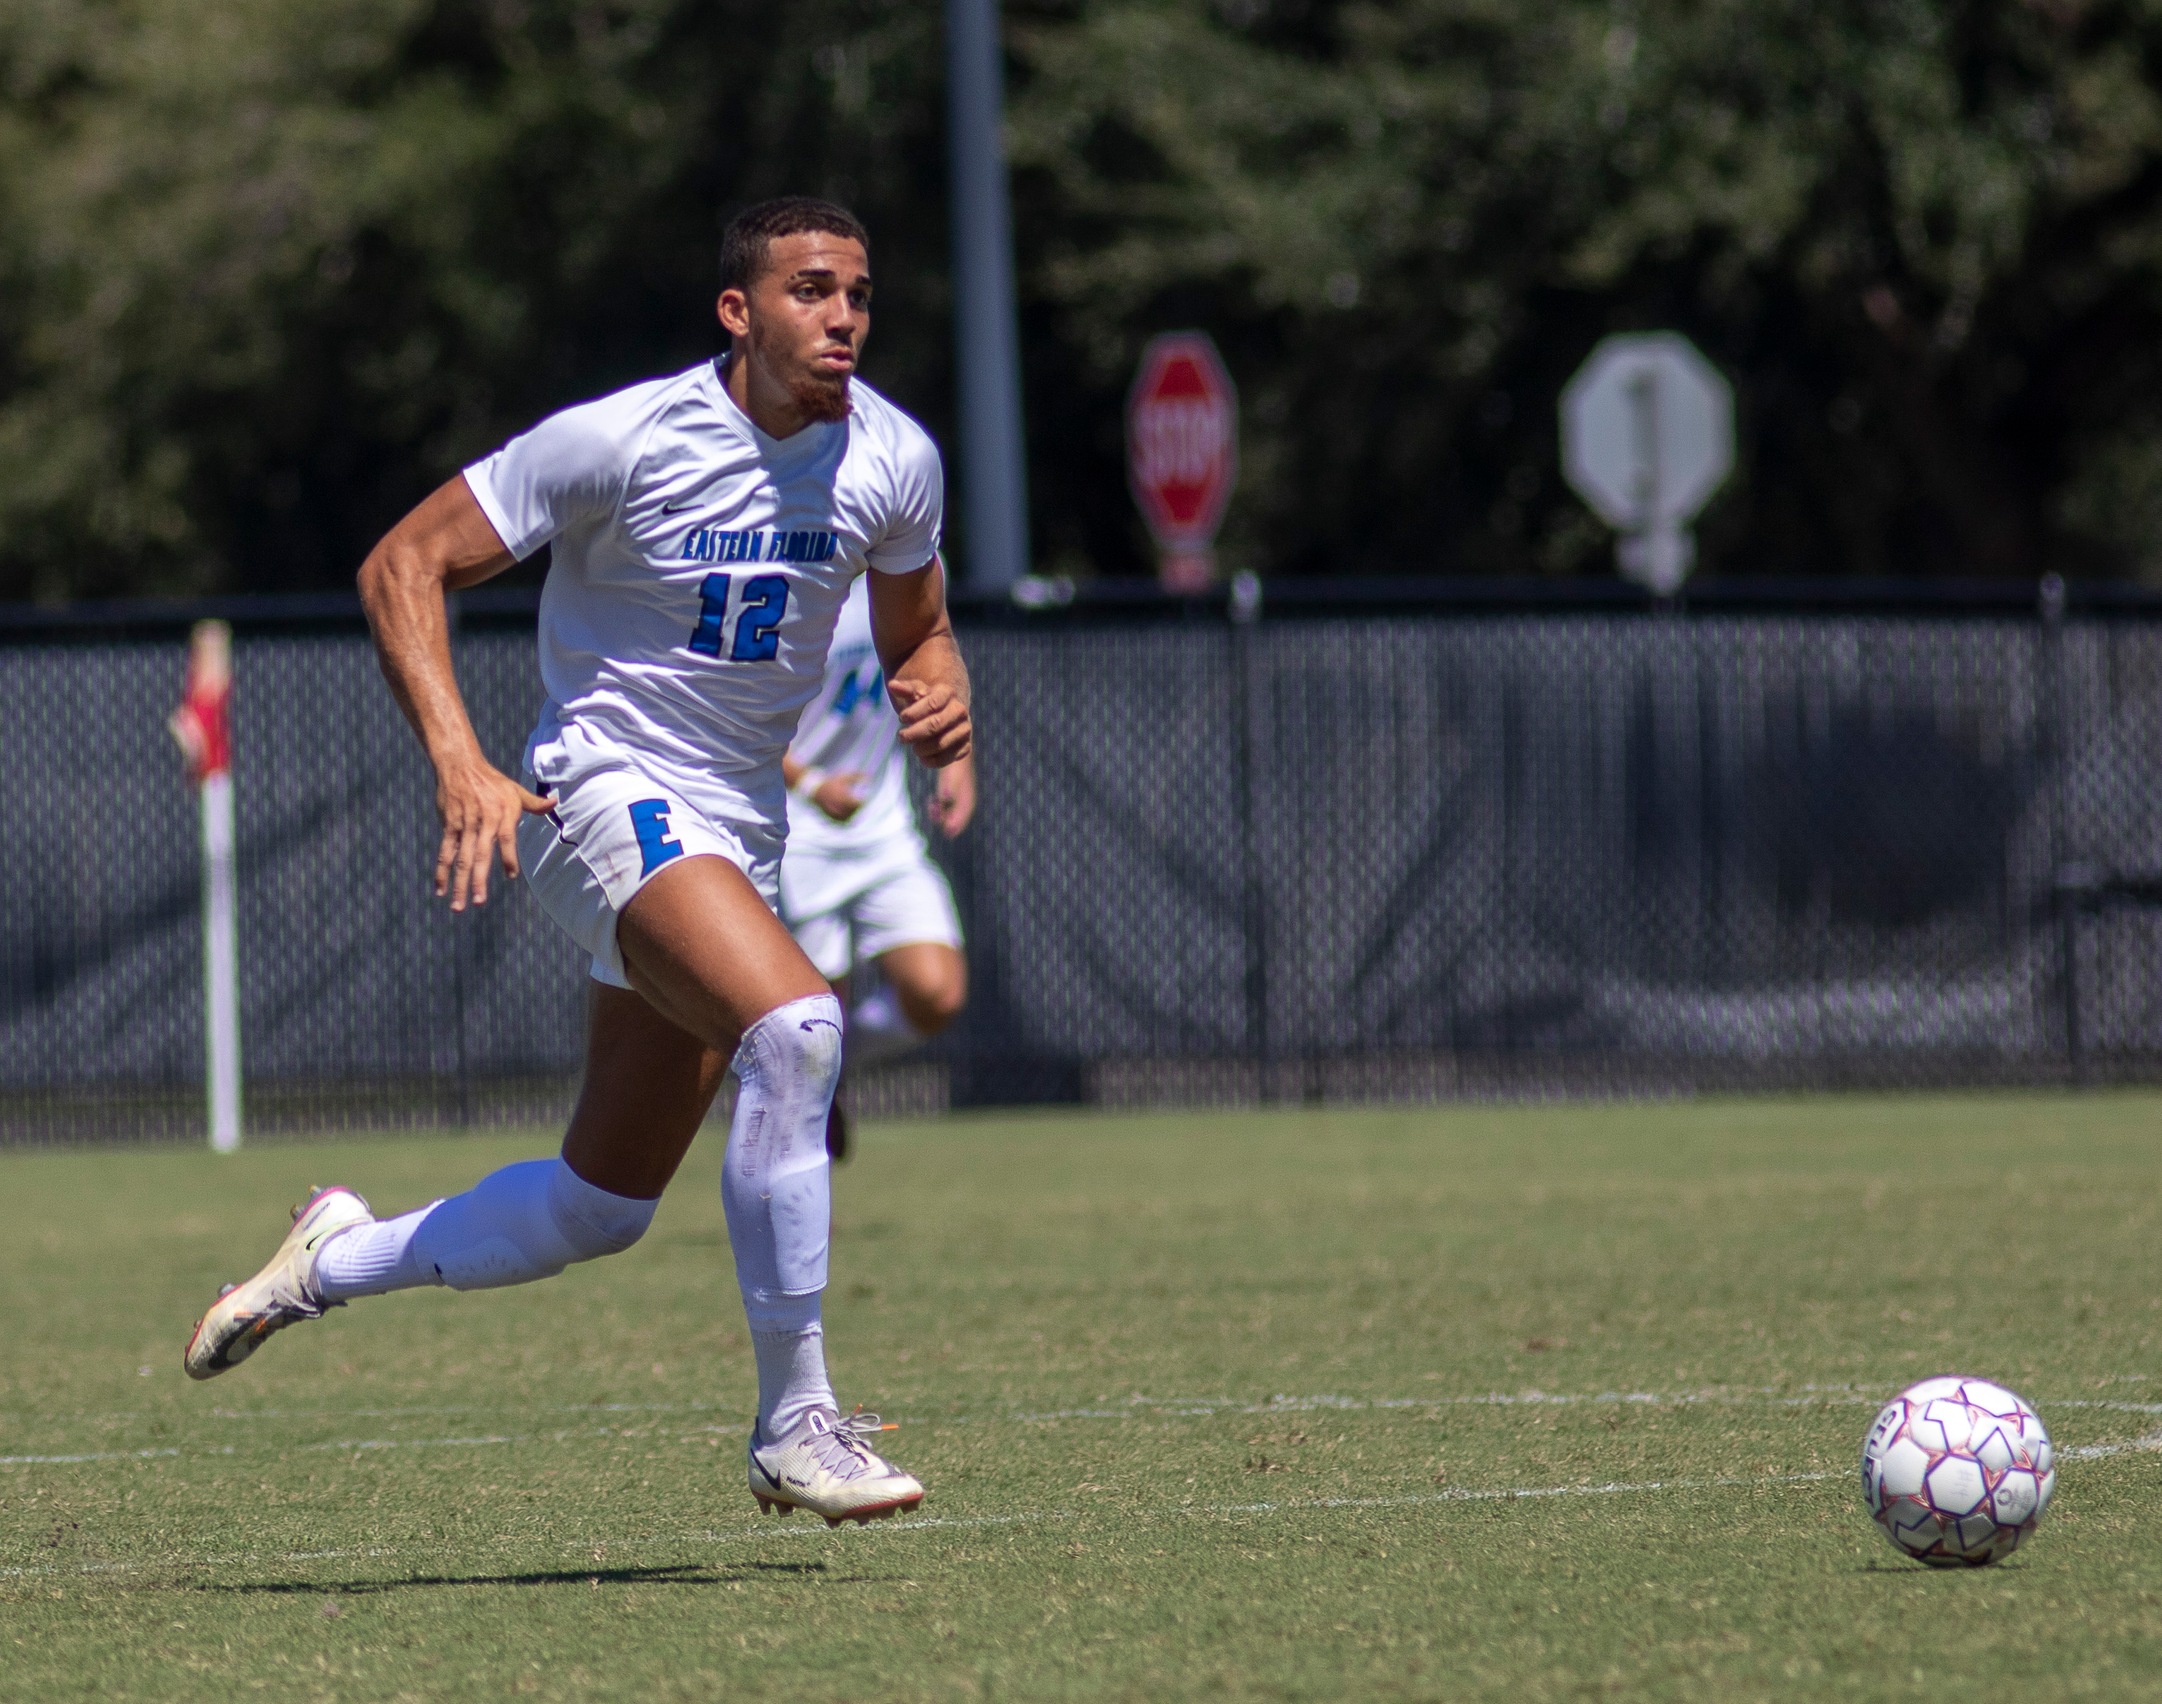 Men's soccer team loses to Daytona State College in Region 8 Conference match